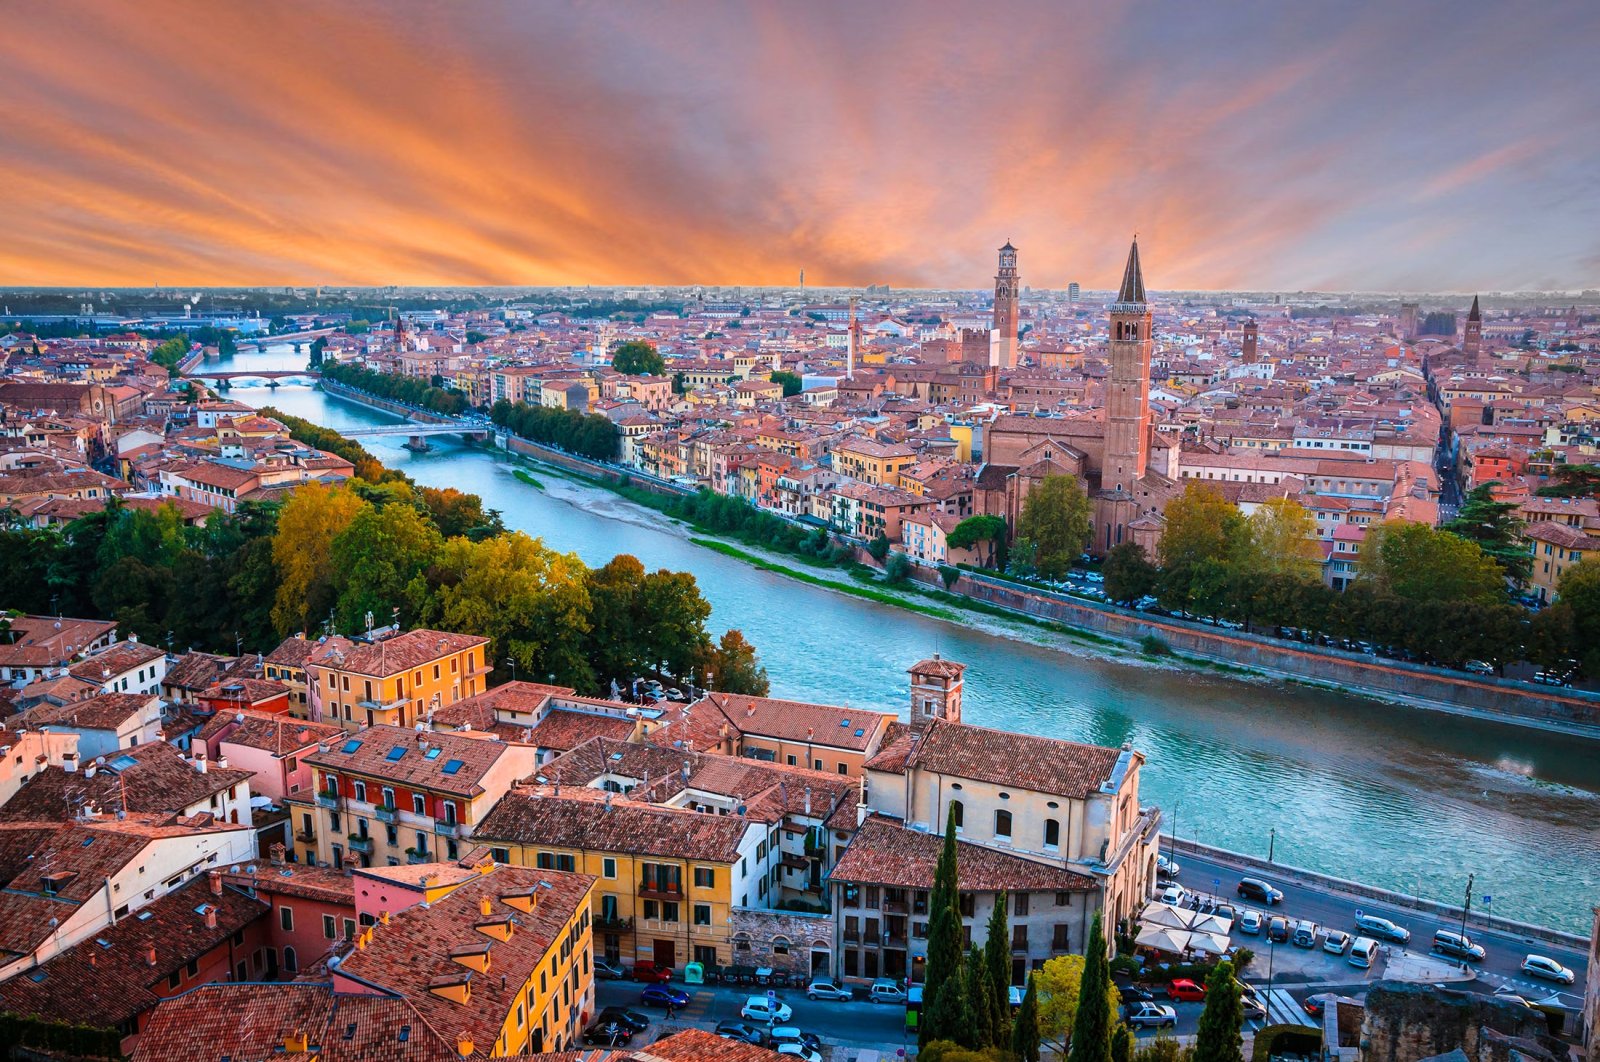 A general view of Verona, Italy. (Shutterstock Photo)